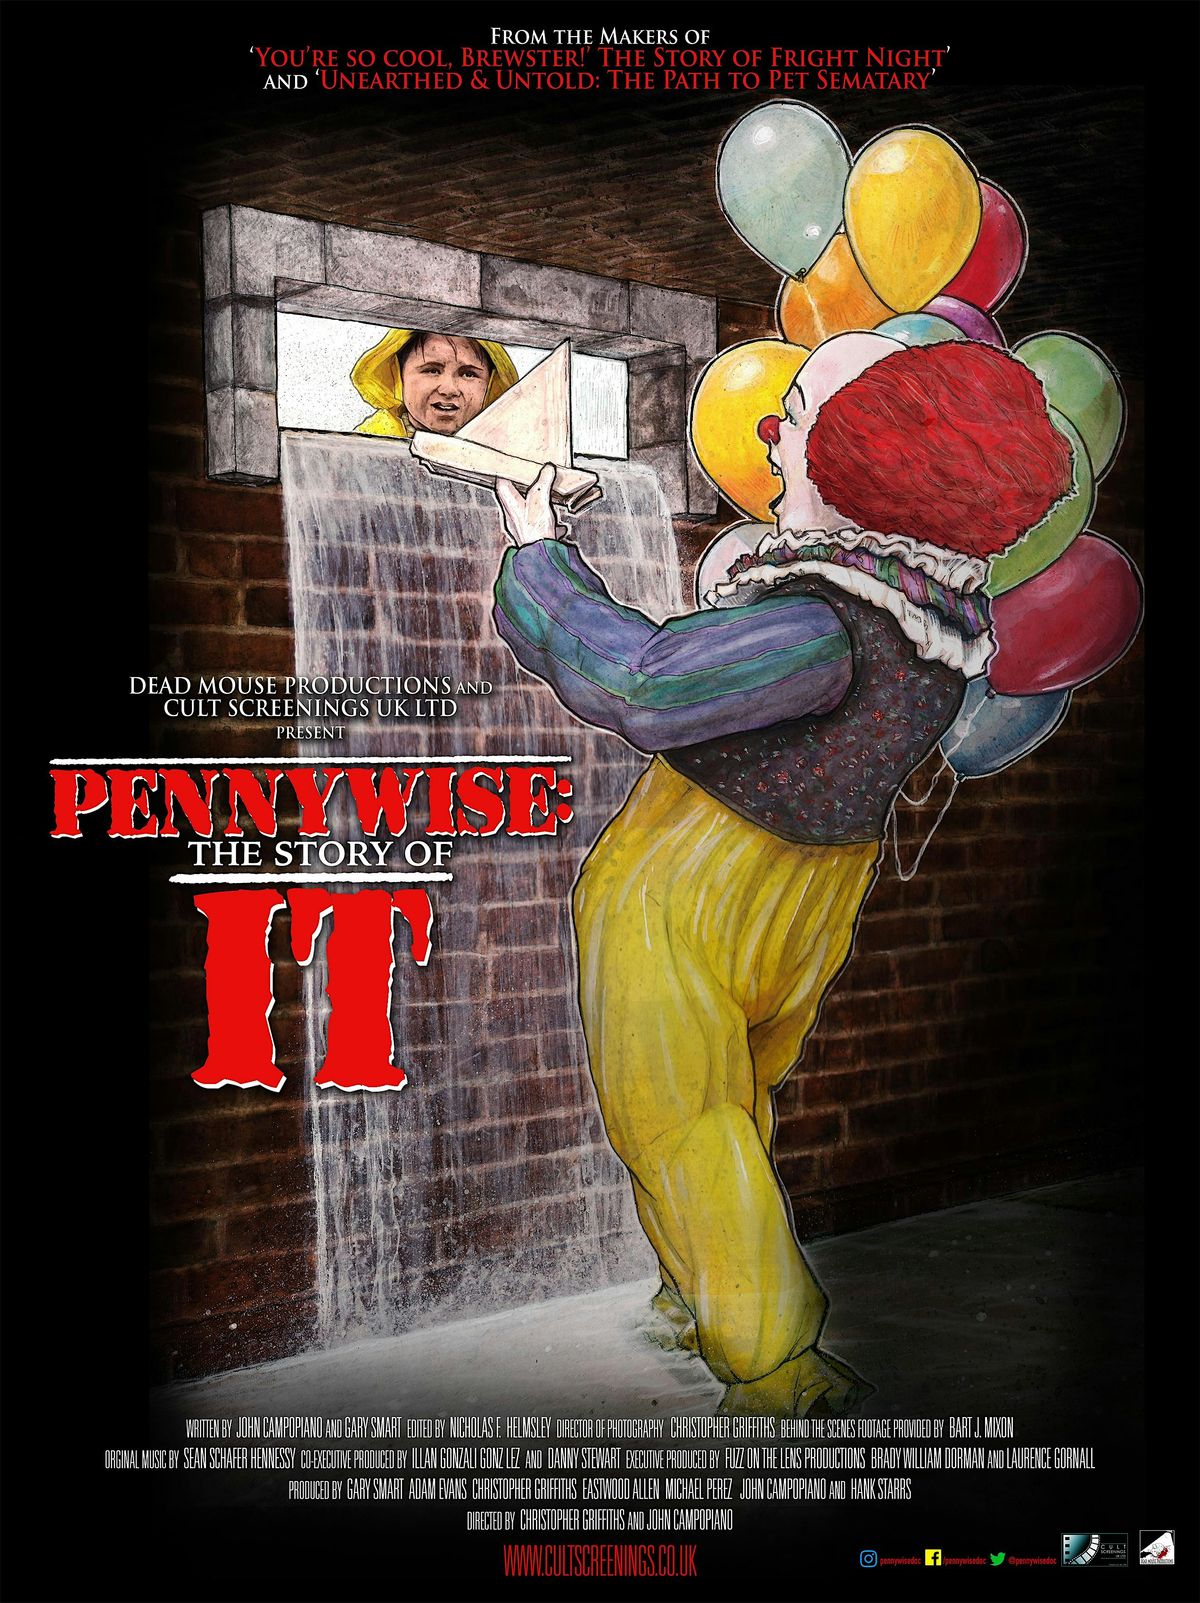 Stephen King's Maine book release \/ Pennywise: The Story of 'It' screening